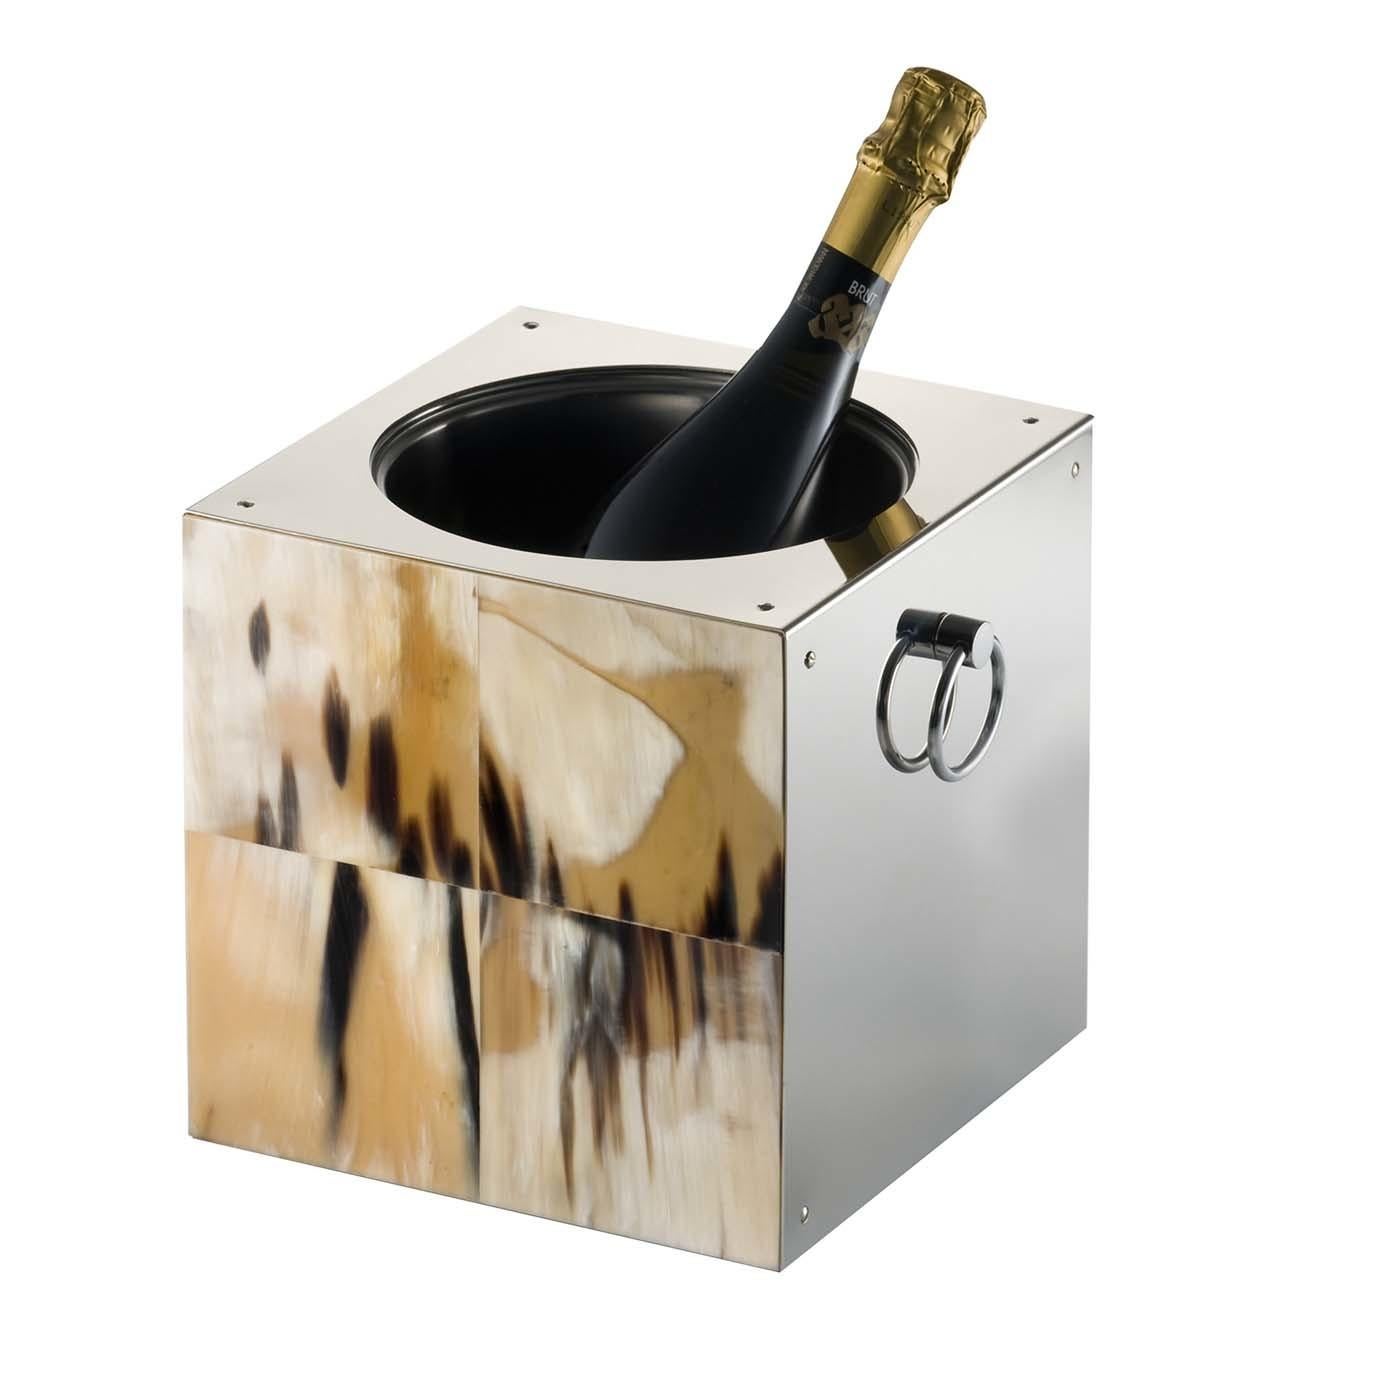 A superb complement to any special occasion, this ice bucket is a stunning sculptural piece in itself, with its rigorous geometric silhouette in stainless steel and horn inserts. The exposed screws add a unique flair to the piece that features a